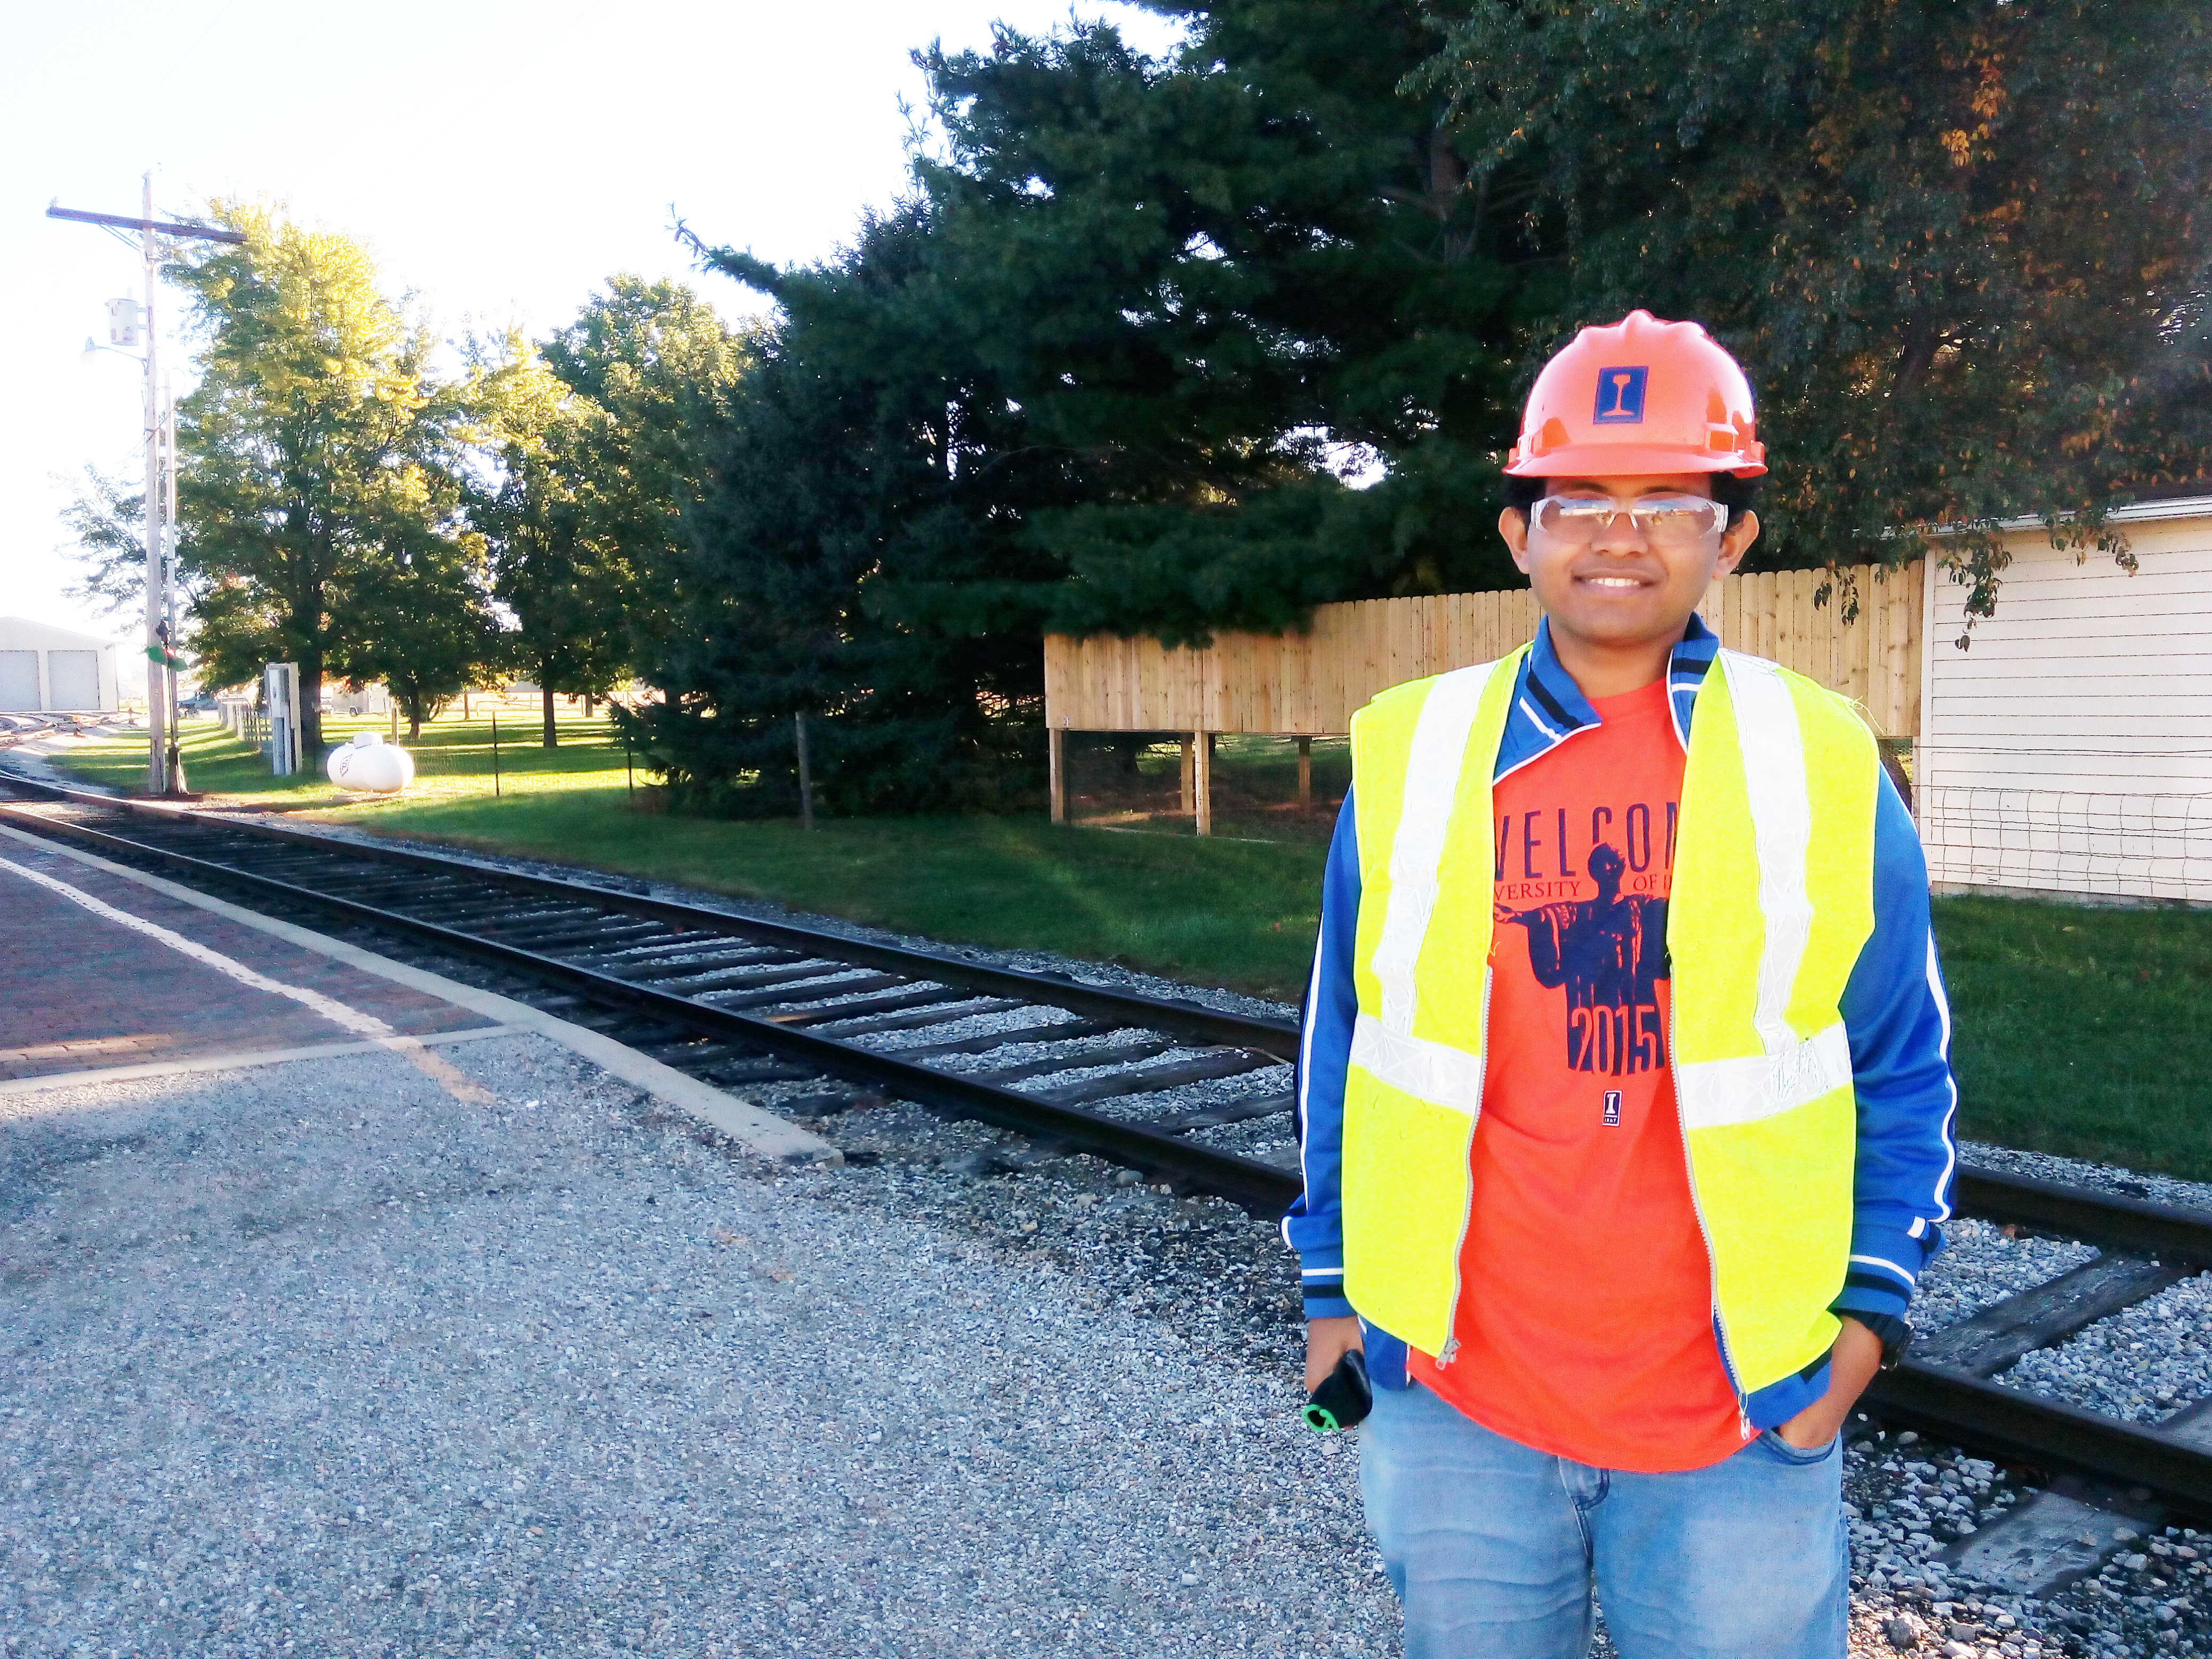 Sushobhan Sen poses for a photo sporting his CEE gear at an earlier field trip to the Monticello Railway Museum.